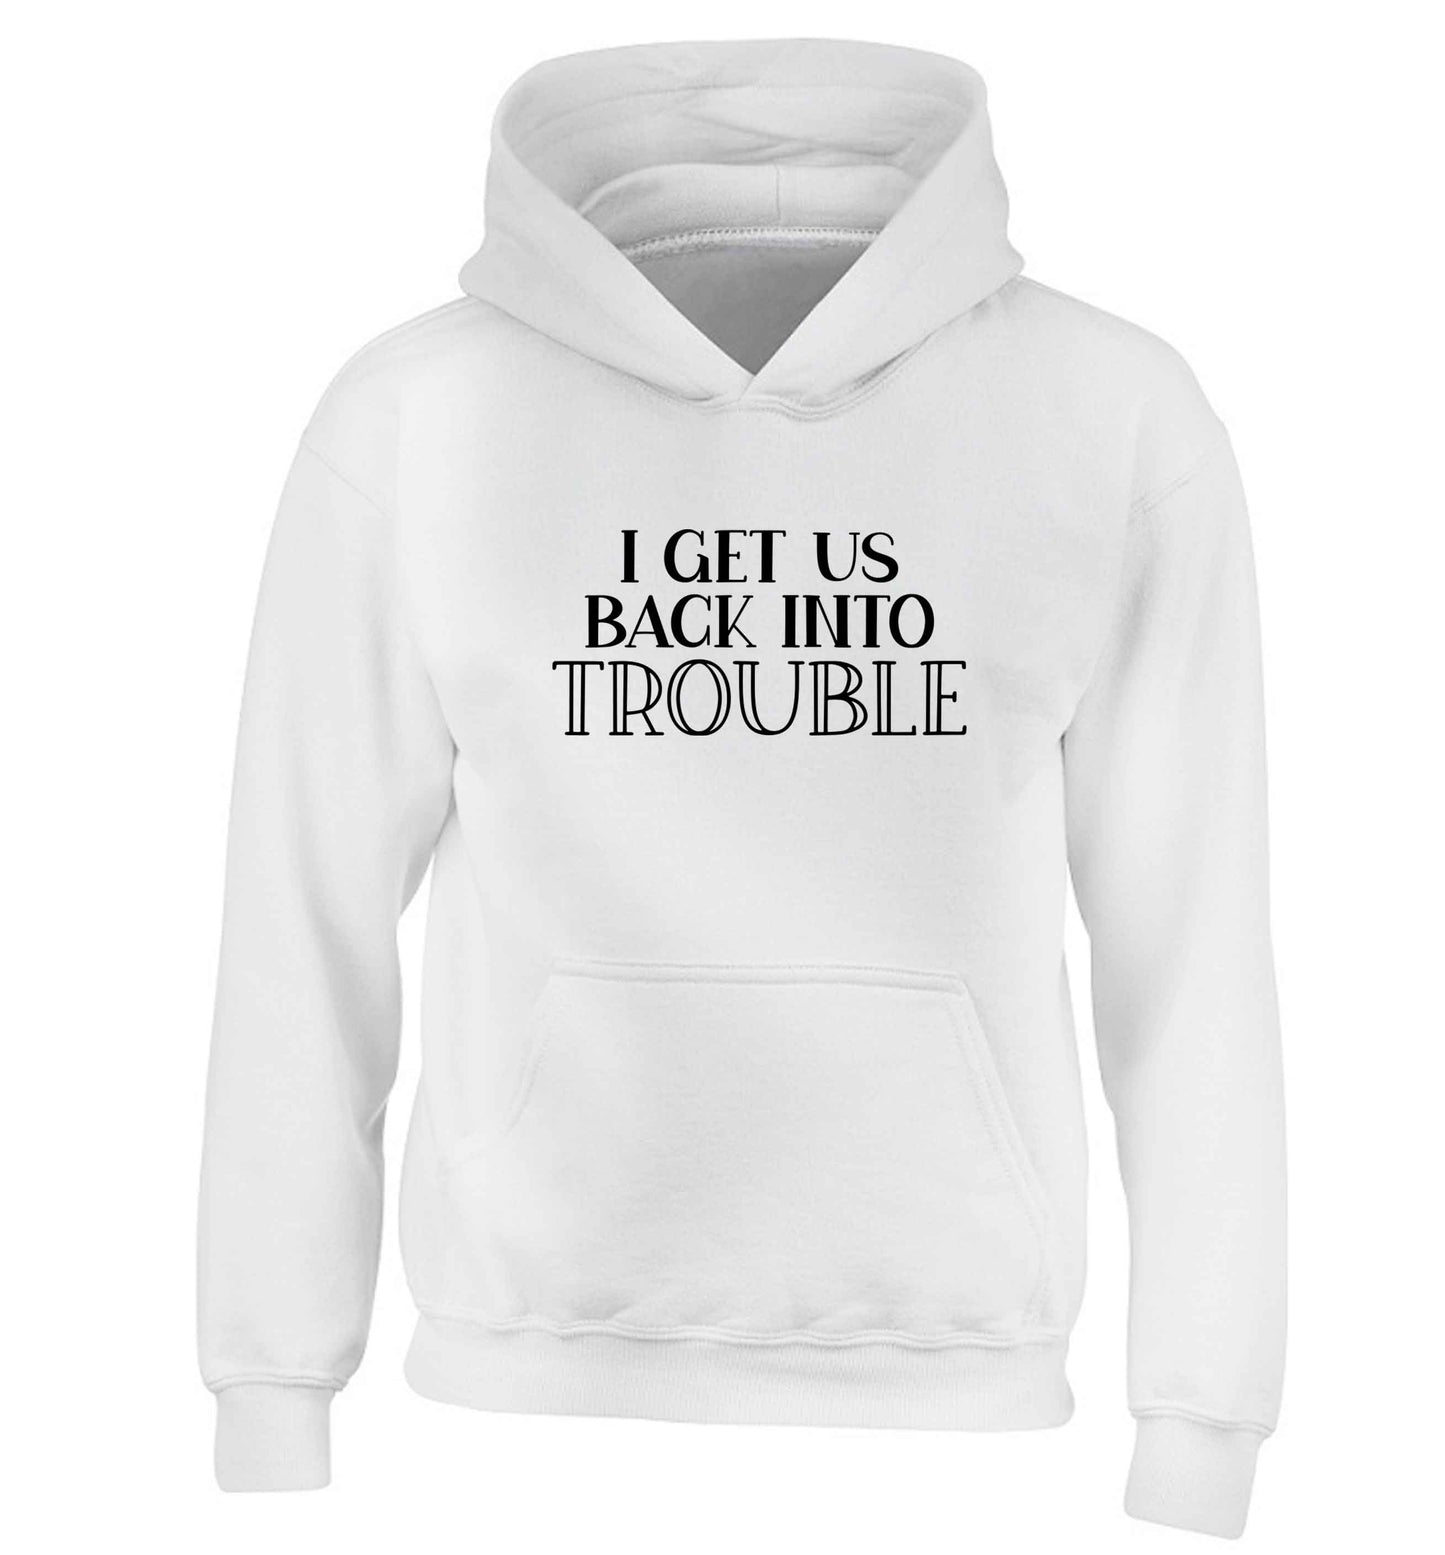 I get us back into trouble children's white hoodie 12-13 Years